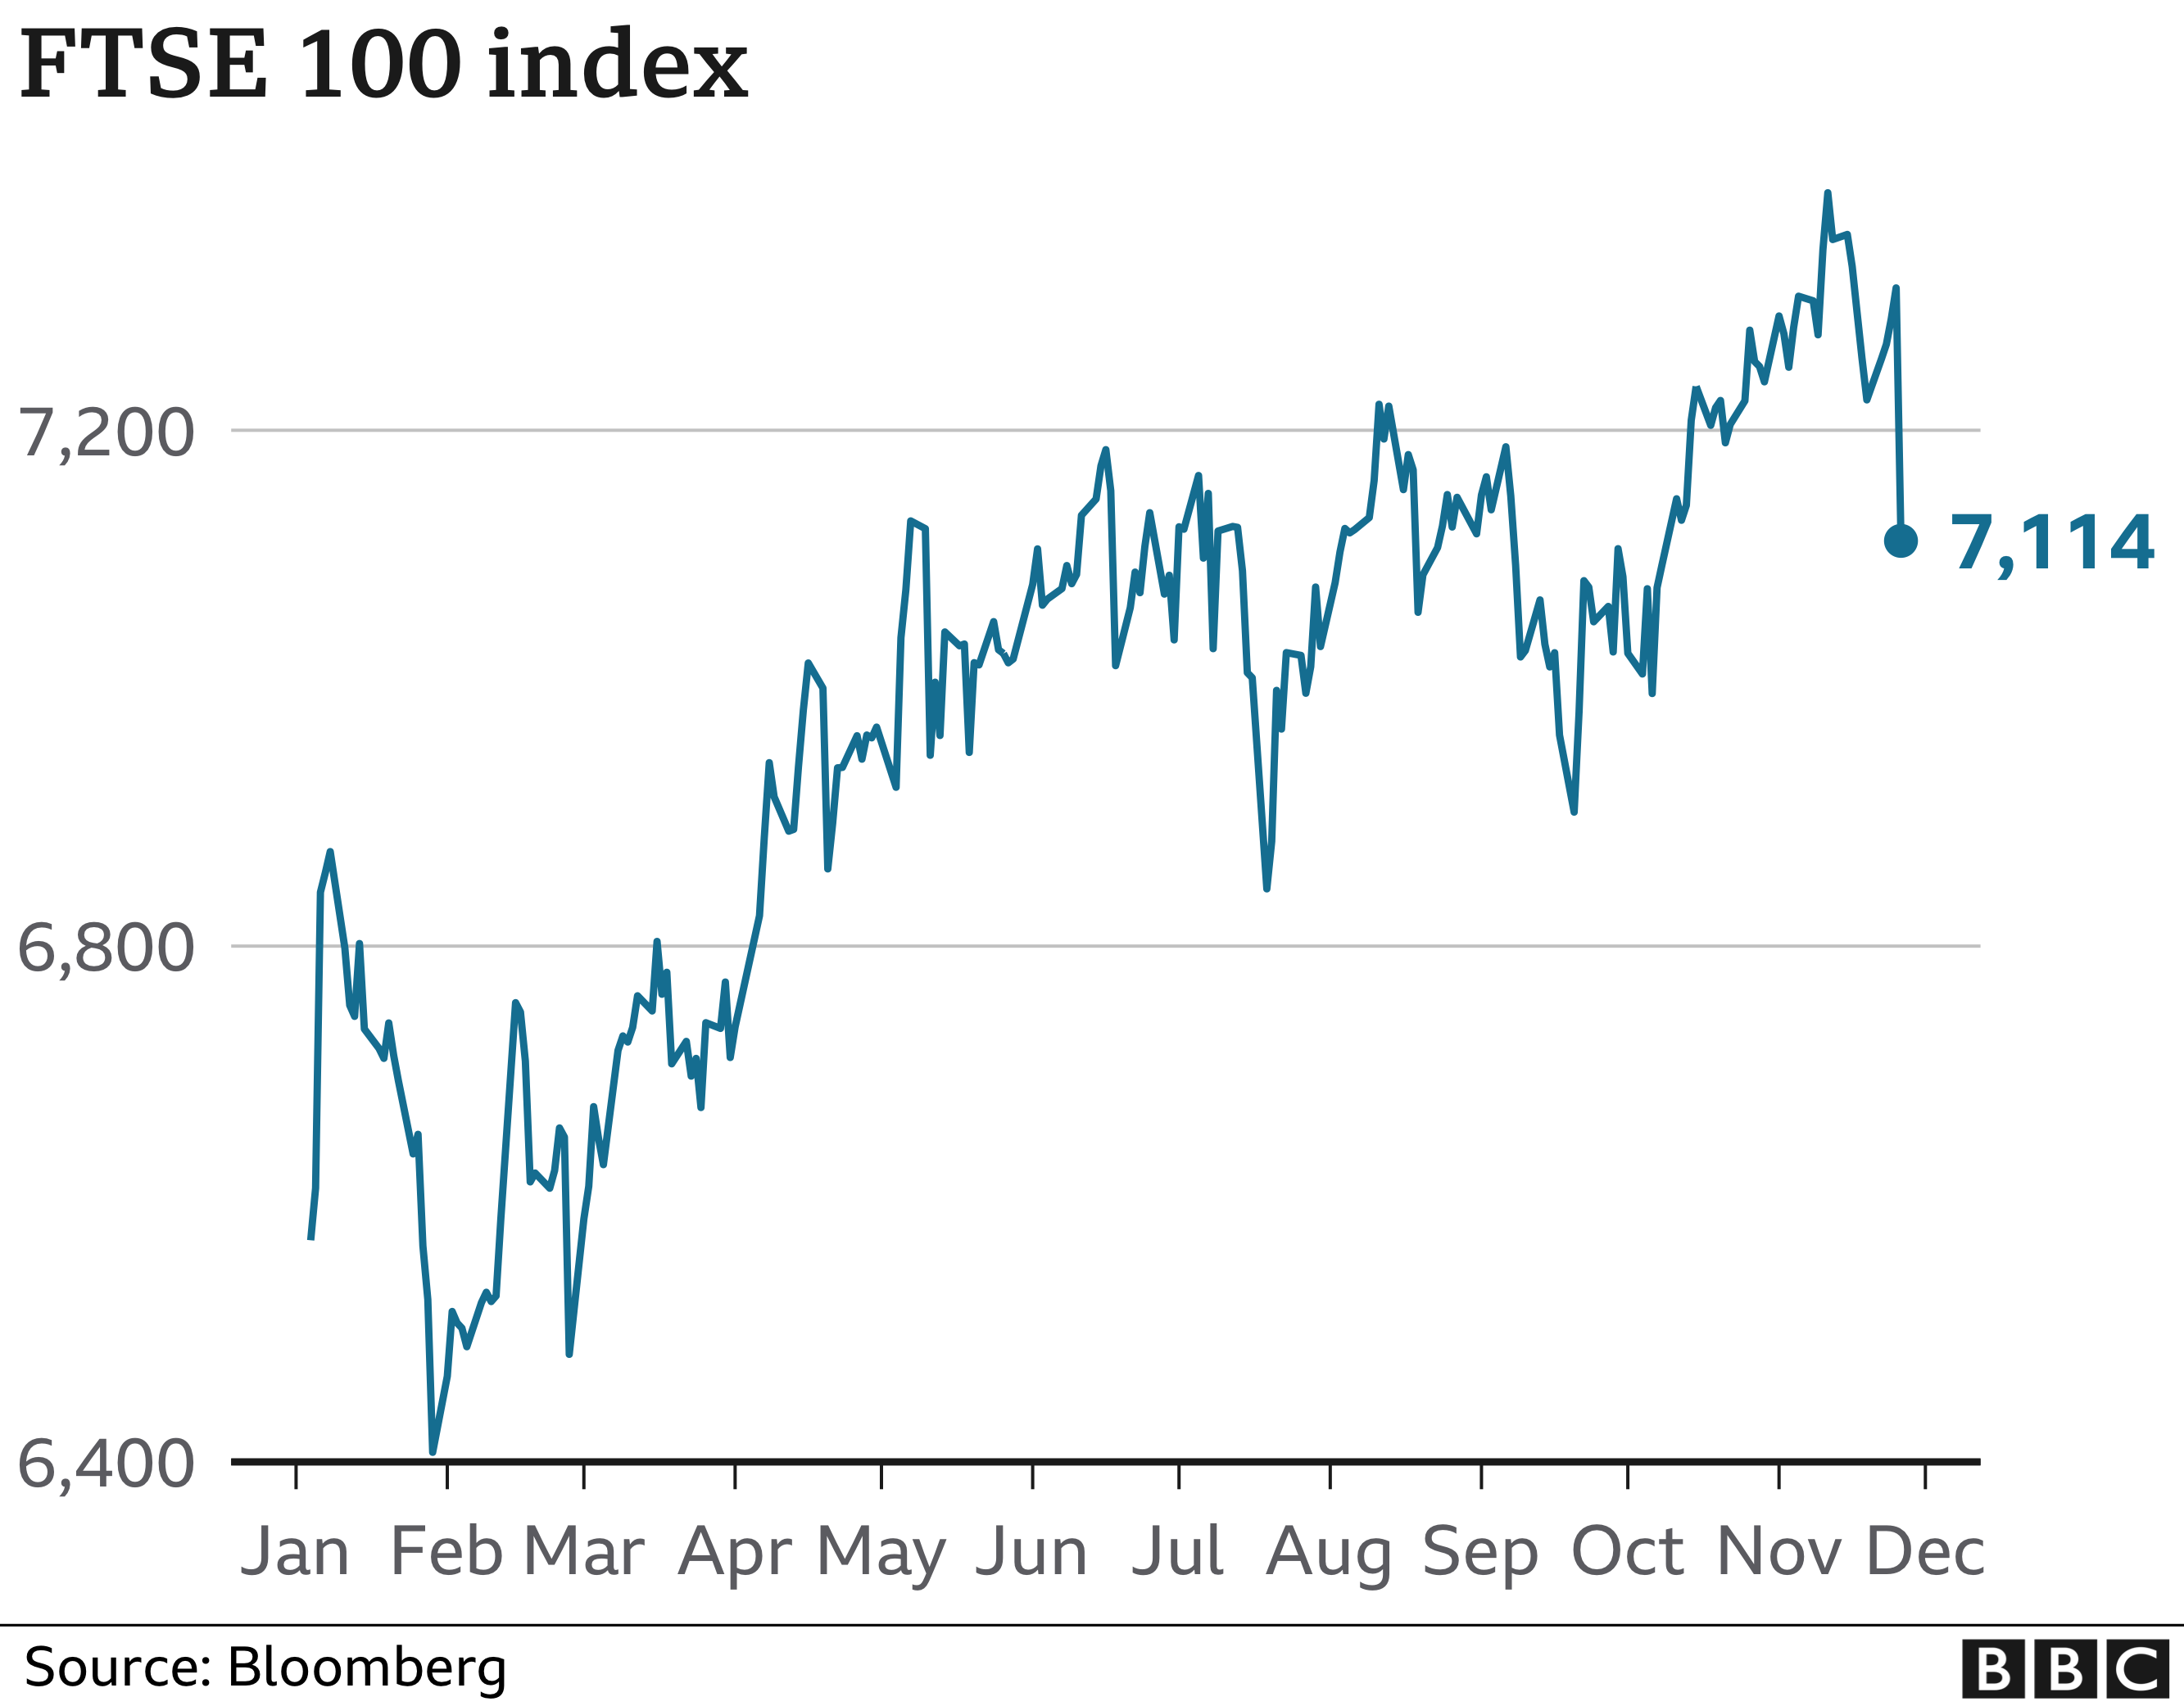 Movements on FTSE 100 in 2021